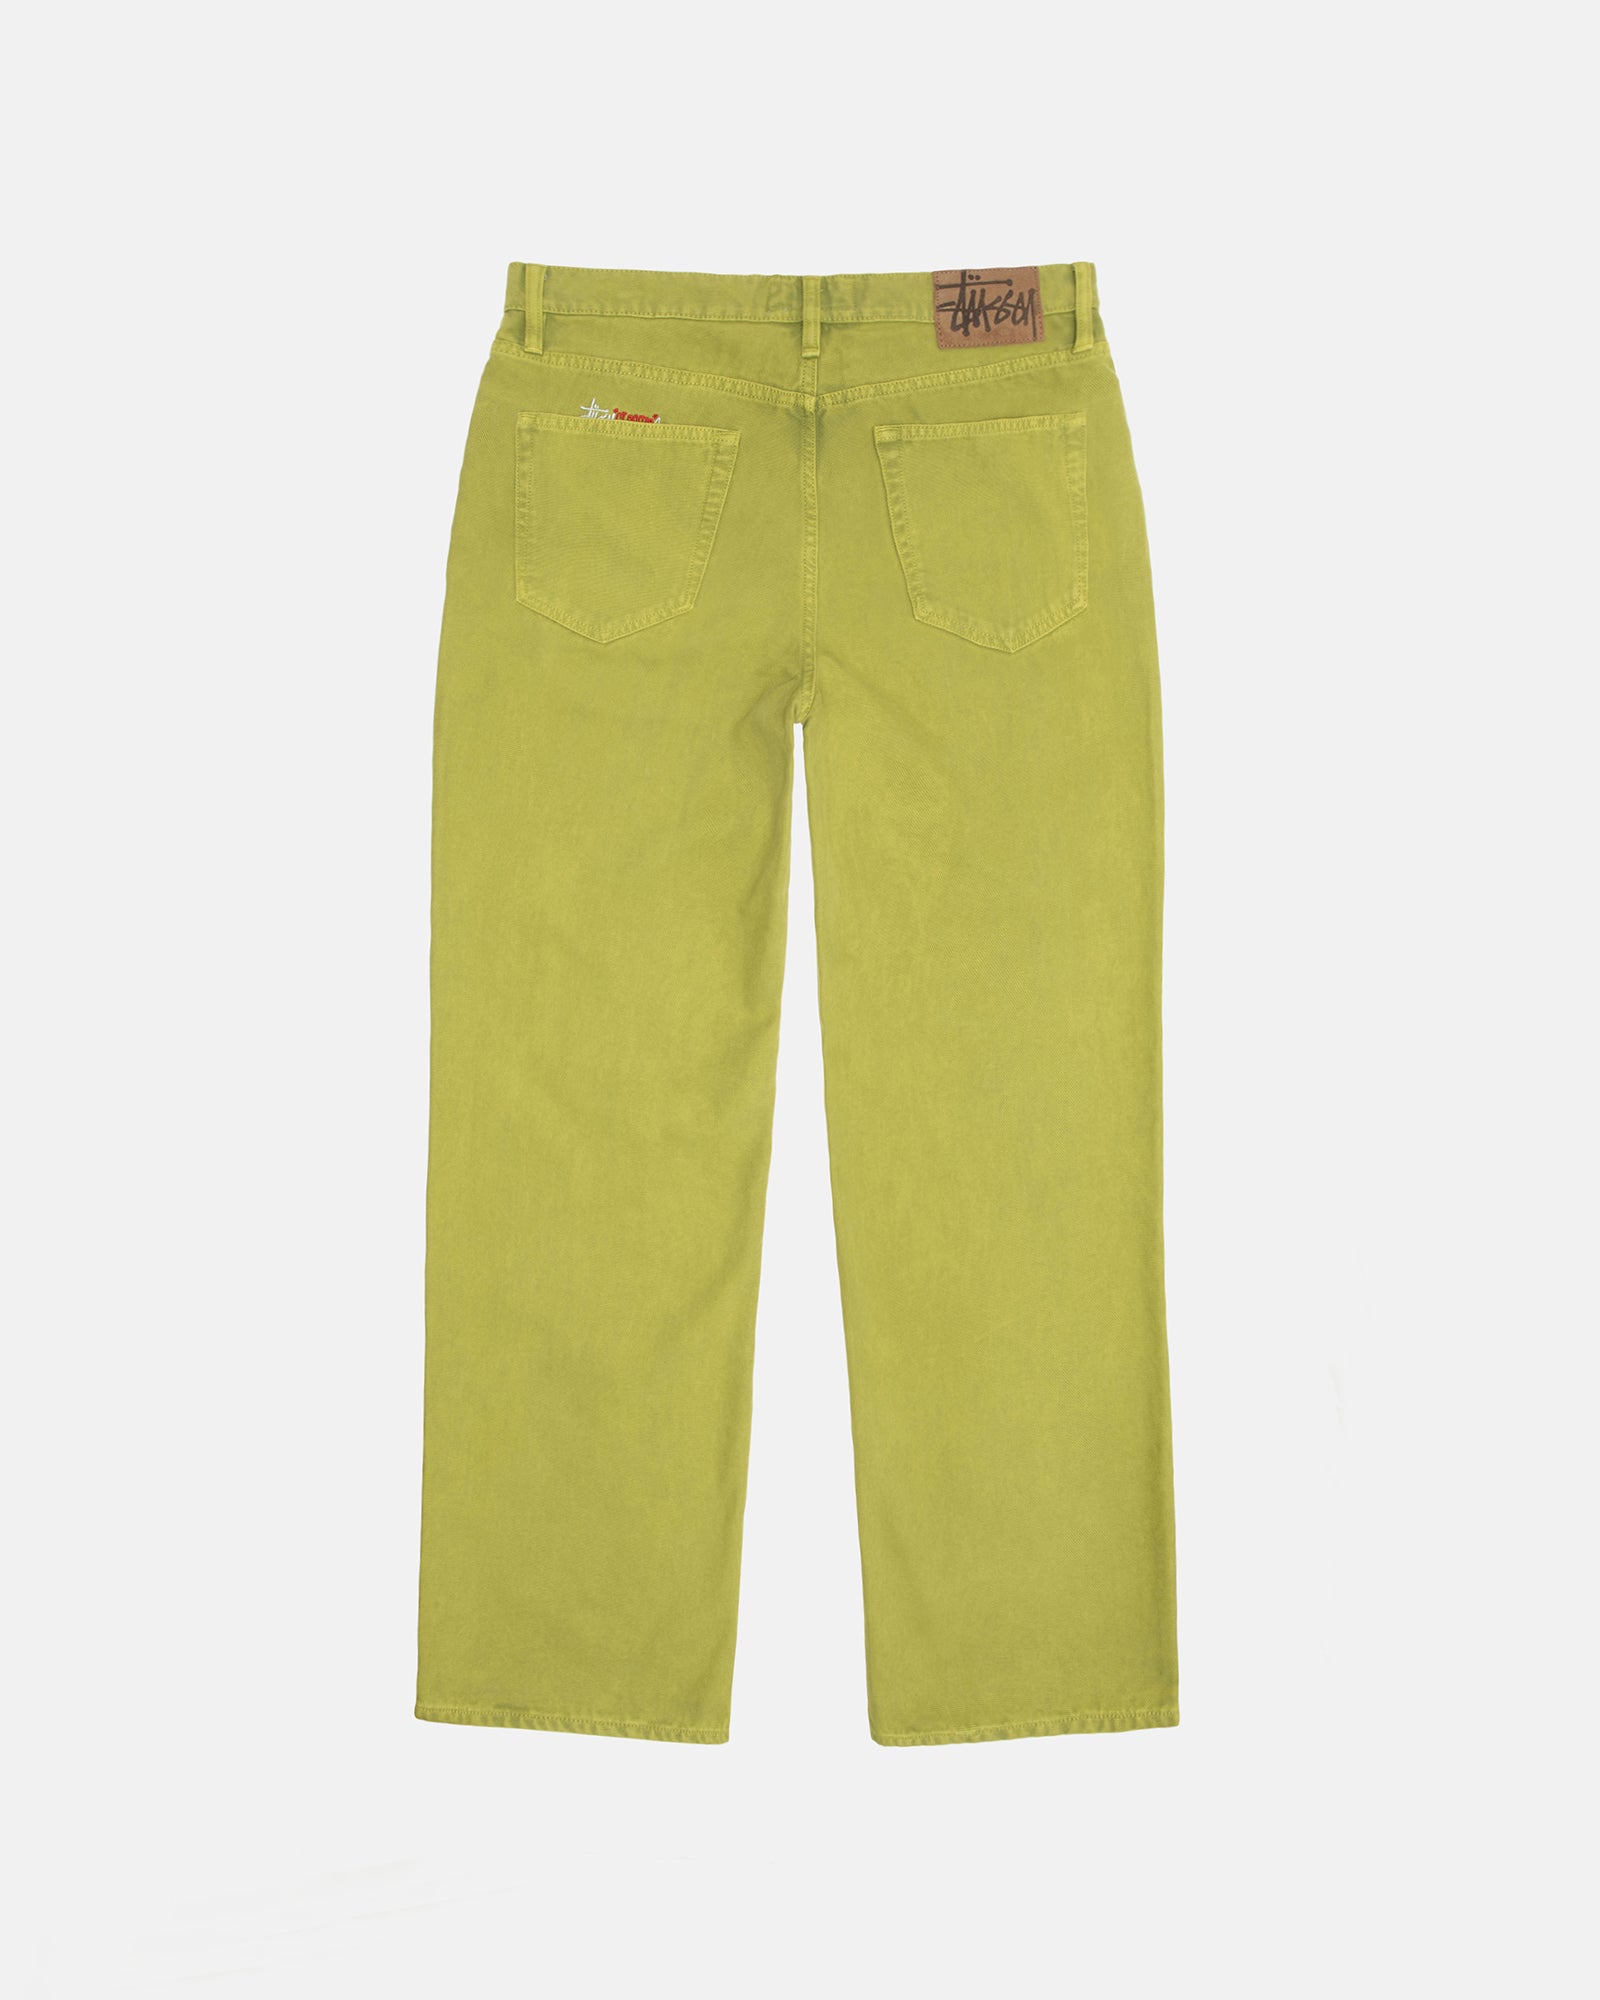 CLASSIC JEAN WASHED CANVAS CACTUS BOTTOMS